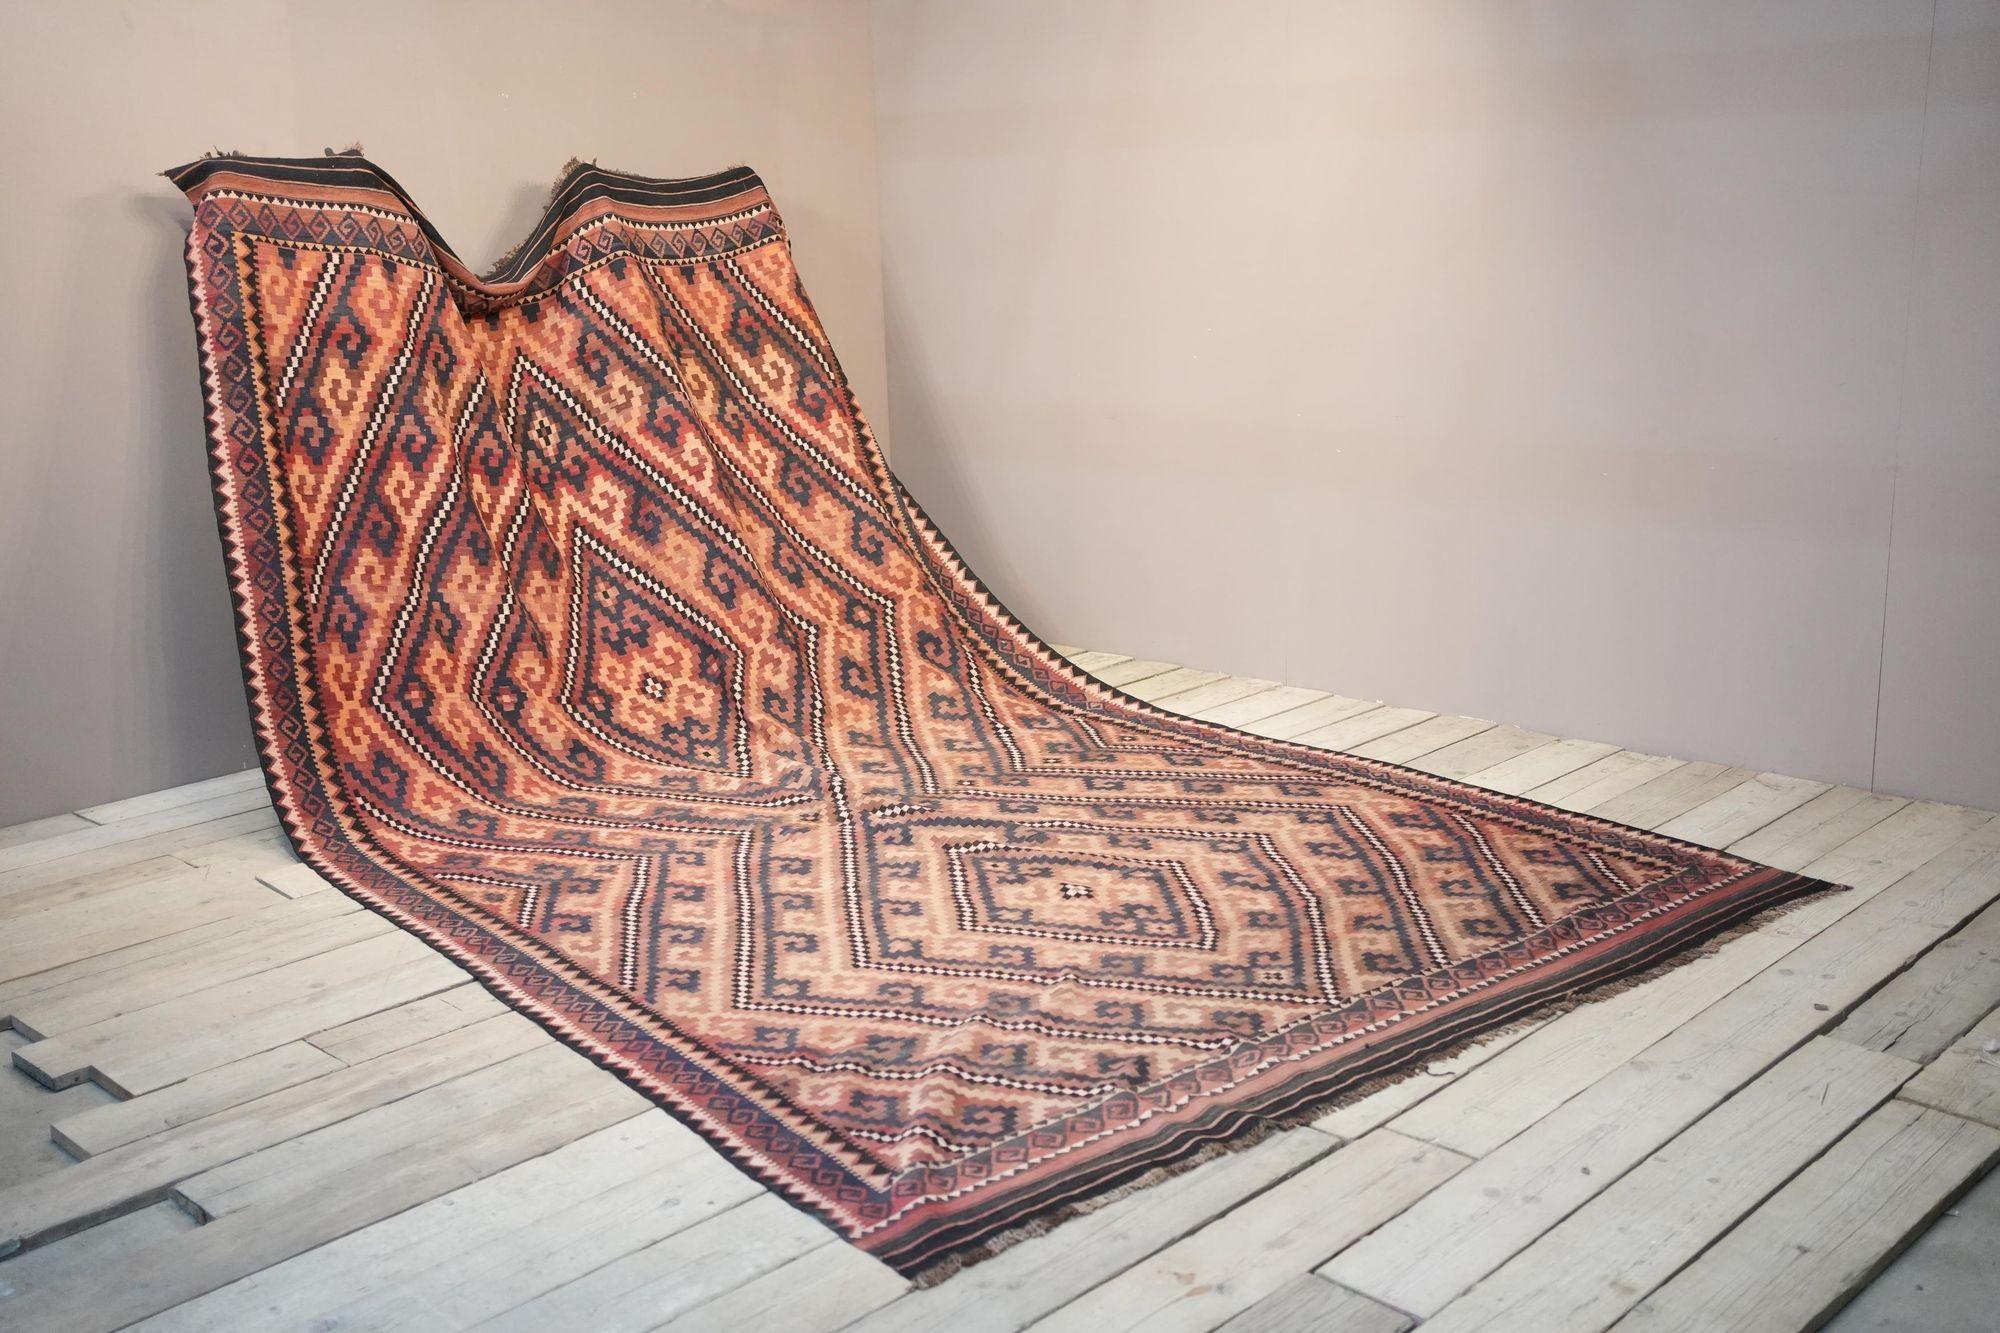 This is a fabulous very large early 20th century Maimana Kilim rug from North Afghanistan. Great quality with slightly asymmetrical design in great subtle browns and reds. Minor fading to one side but nothing that takes away from the rug and its age